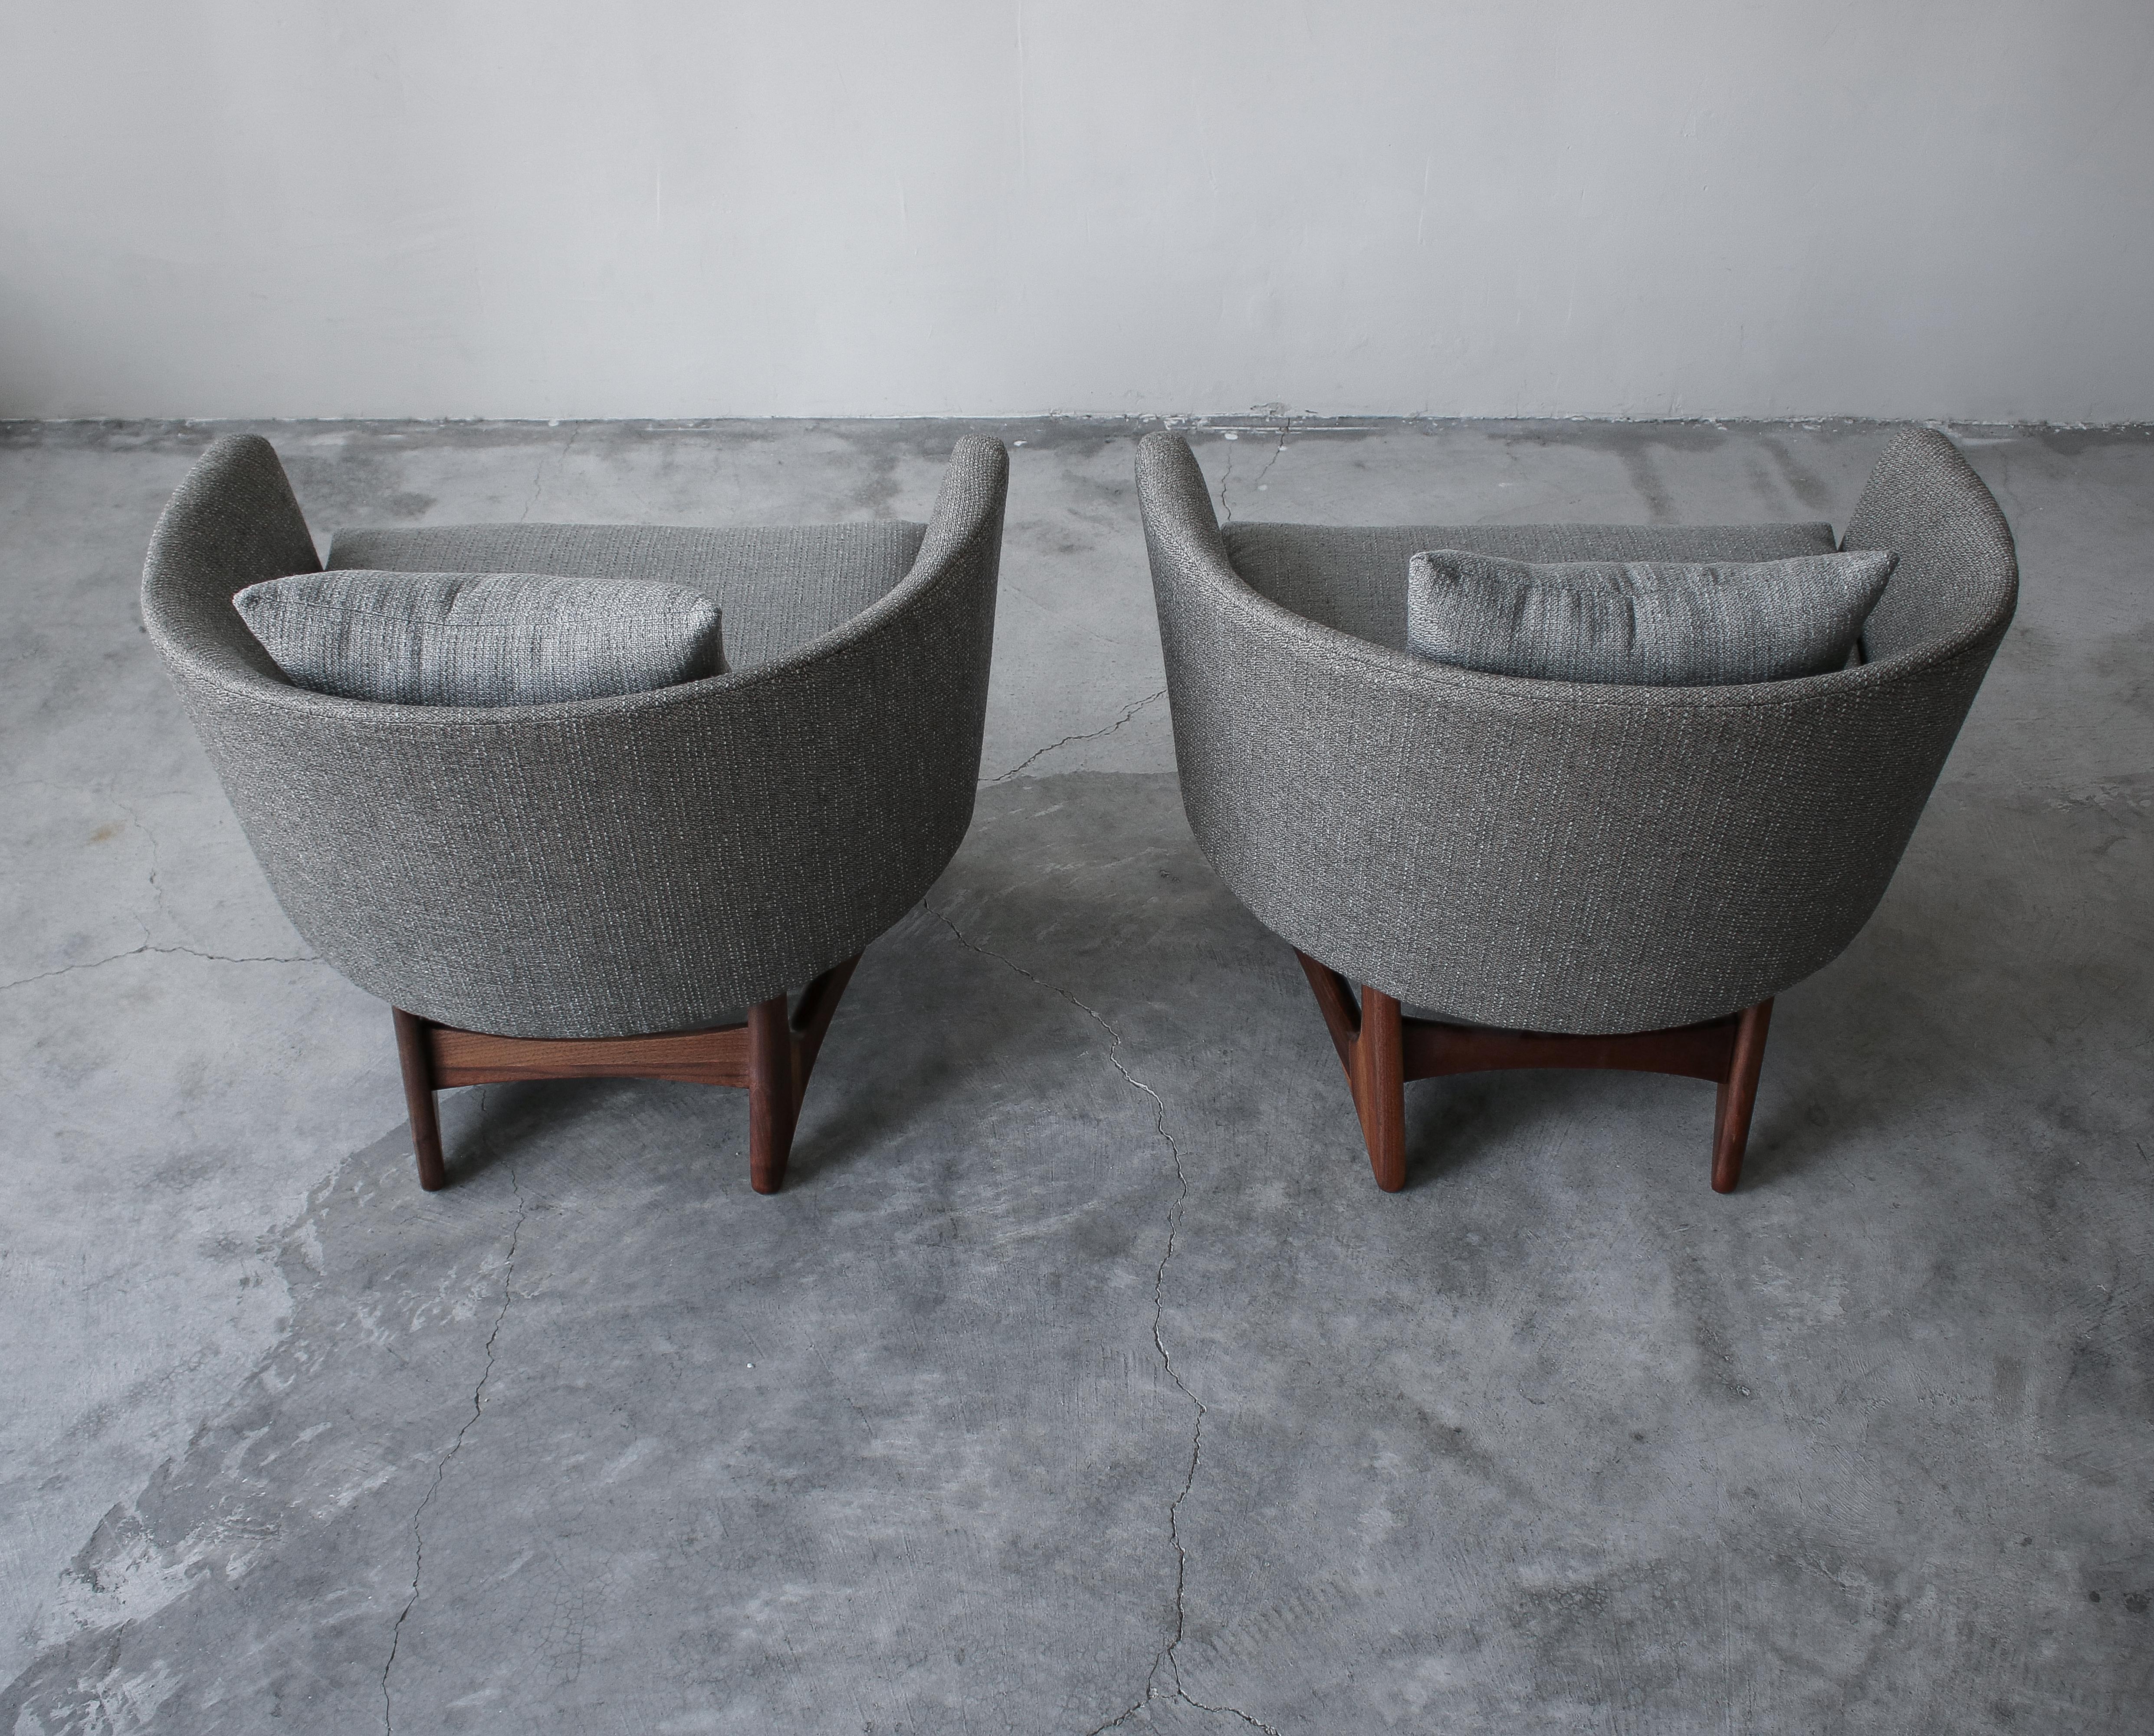 Walnut Pair of Midcentury Lounge Chairs by Adrian Pearsall for Craft Associates